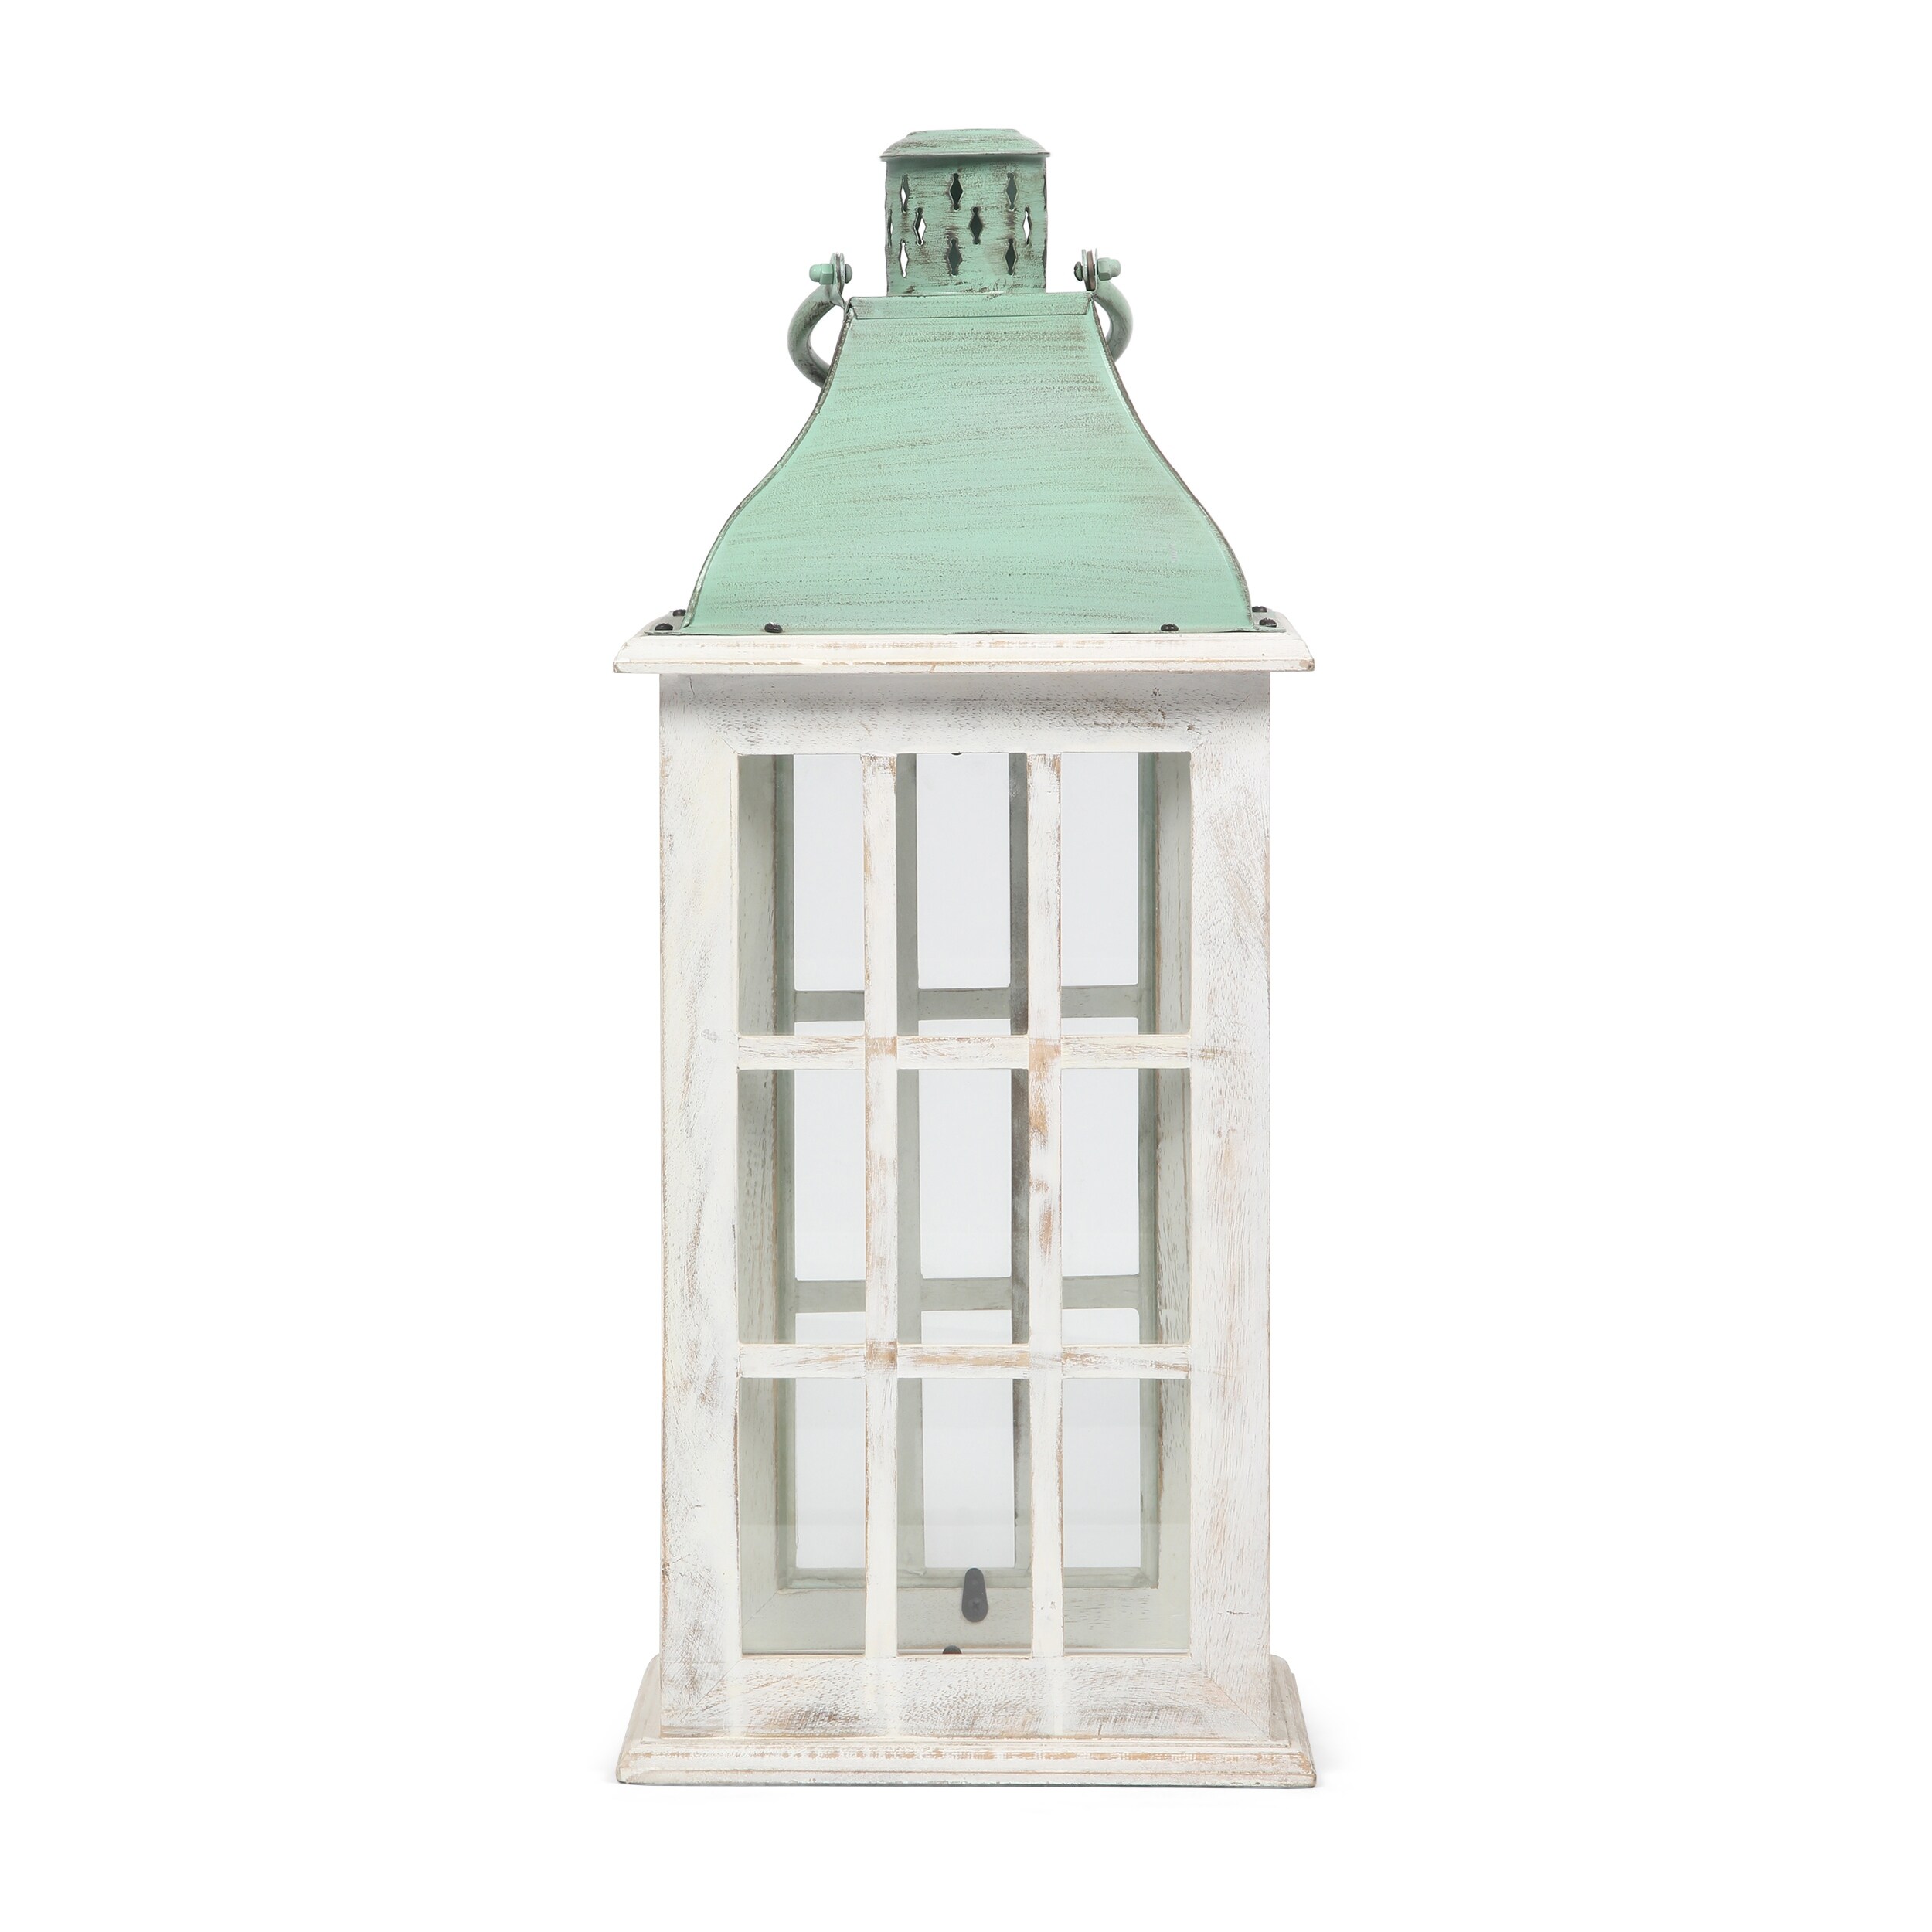 Outdoor Lantern 14.5” High Vintage Lantern Decorative Metal Candle Holder  with Tempered Glass for Garden Patio Living Room Indoor Home Yard Hallway